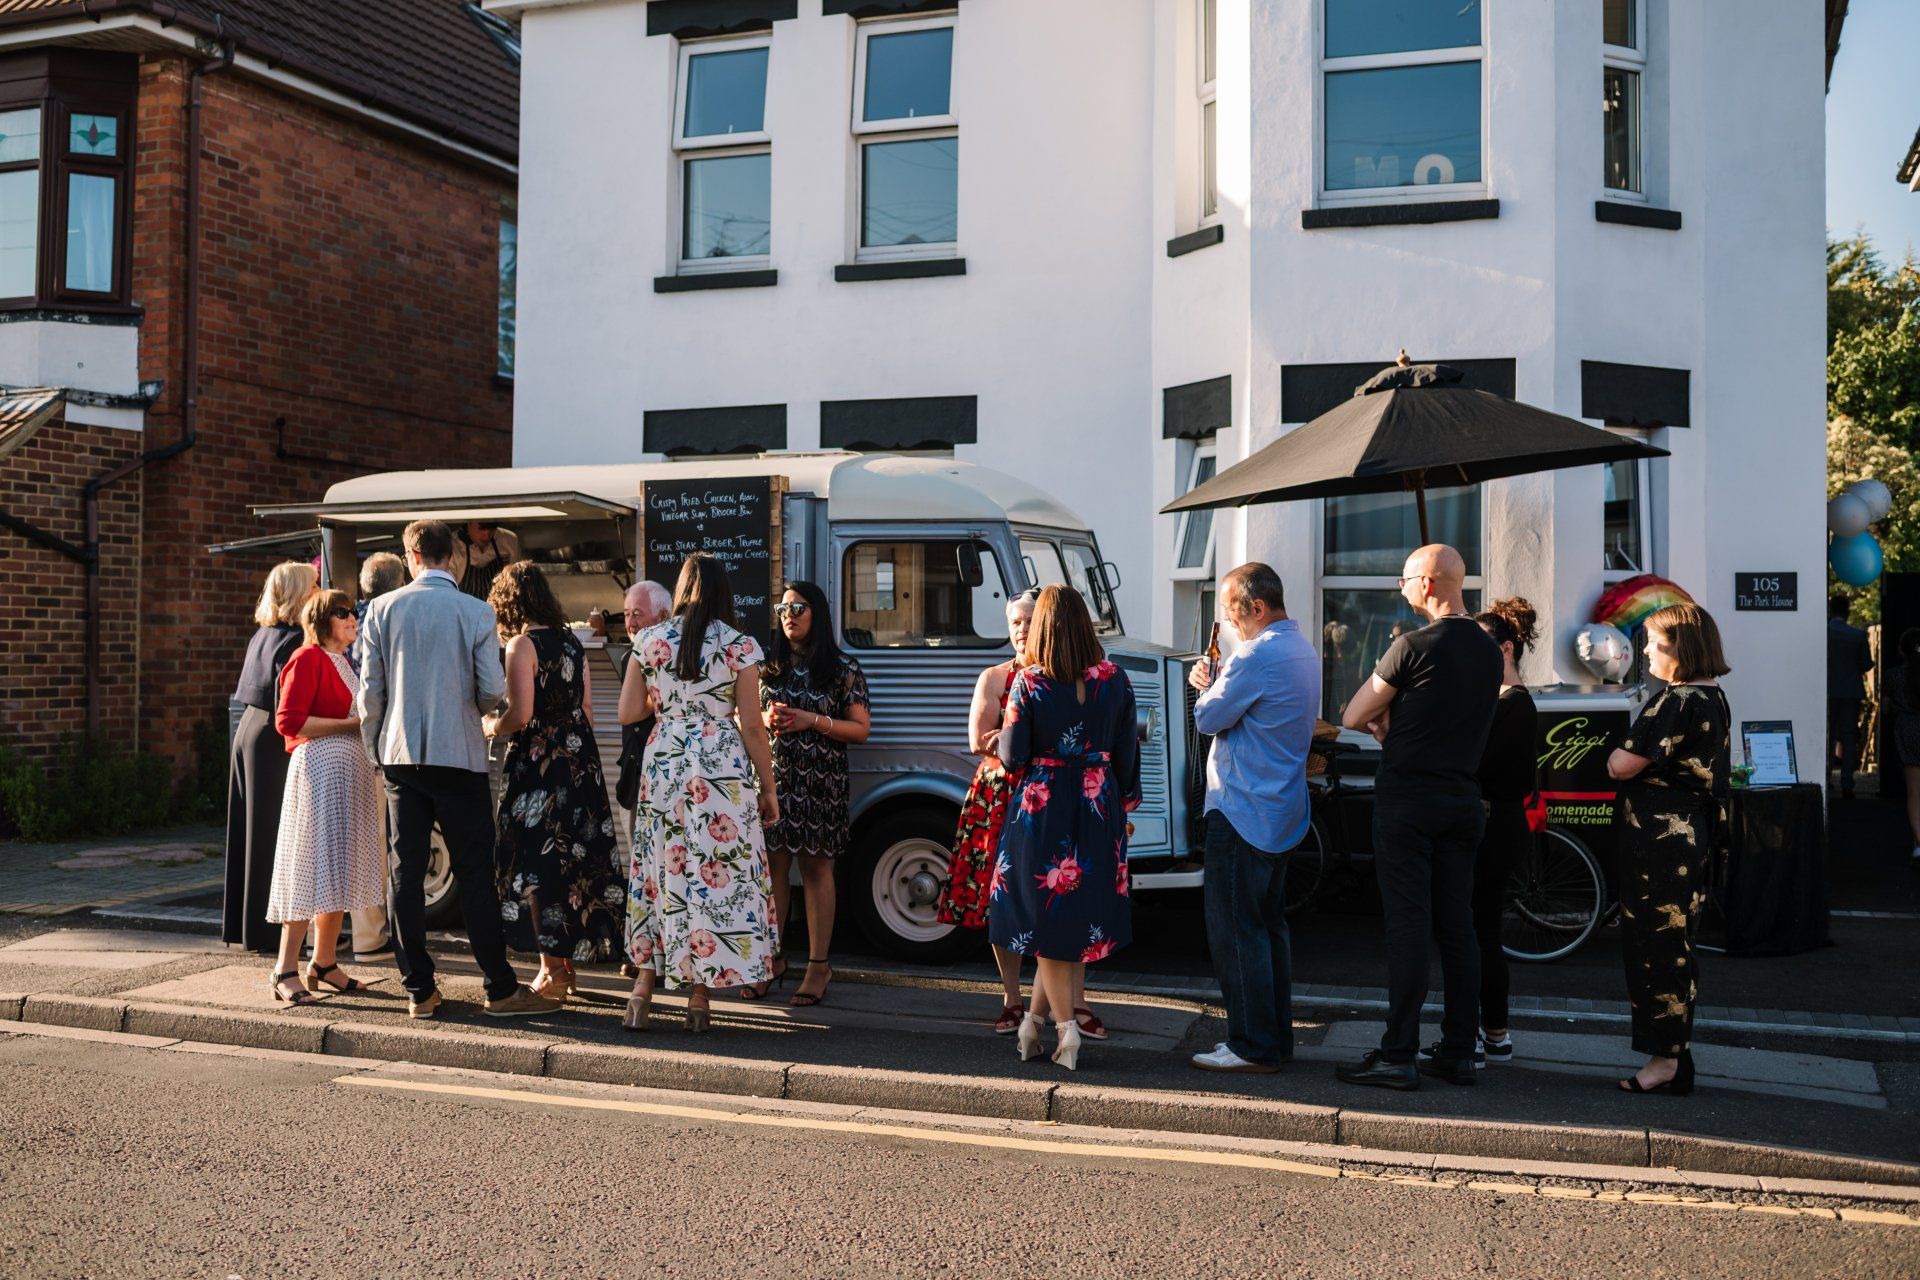 Wedding Guests going up to a mobile food van to collect their food at a DIY wedding co-ordinated by Tasha Mae Wedding Co-ordinator